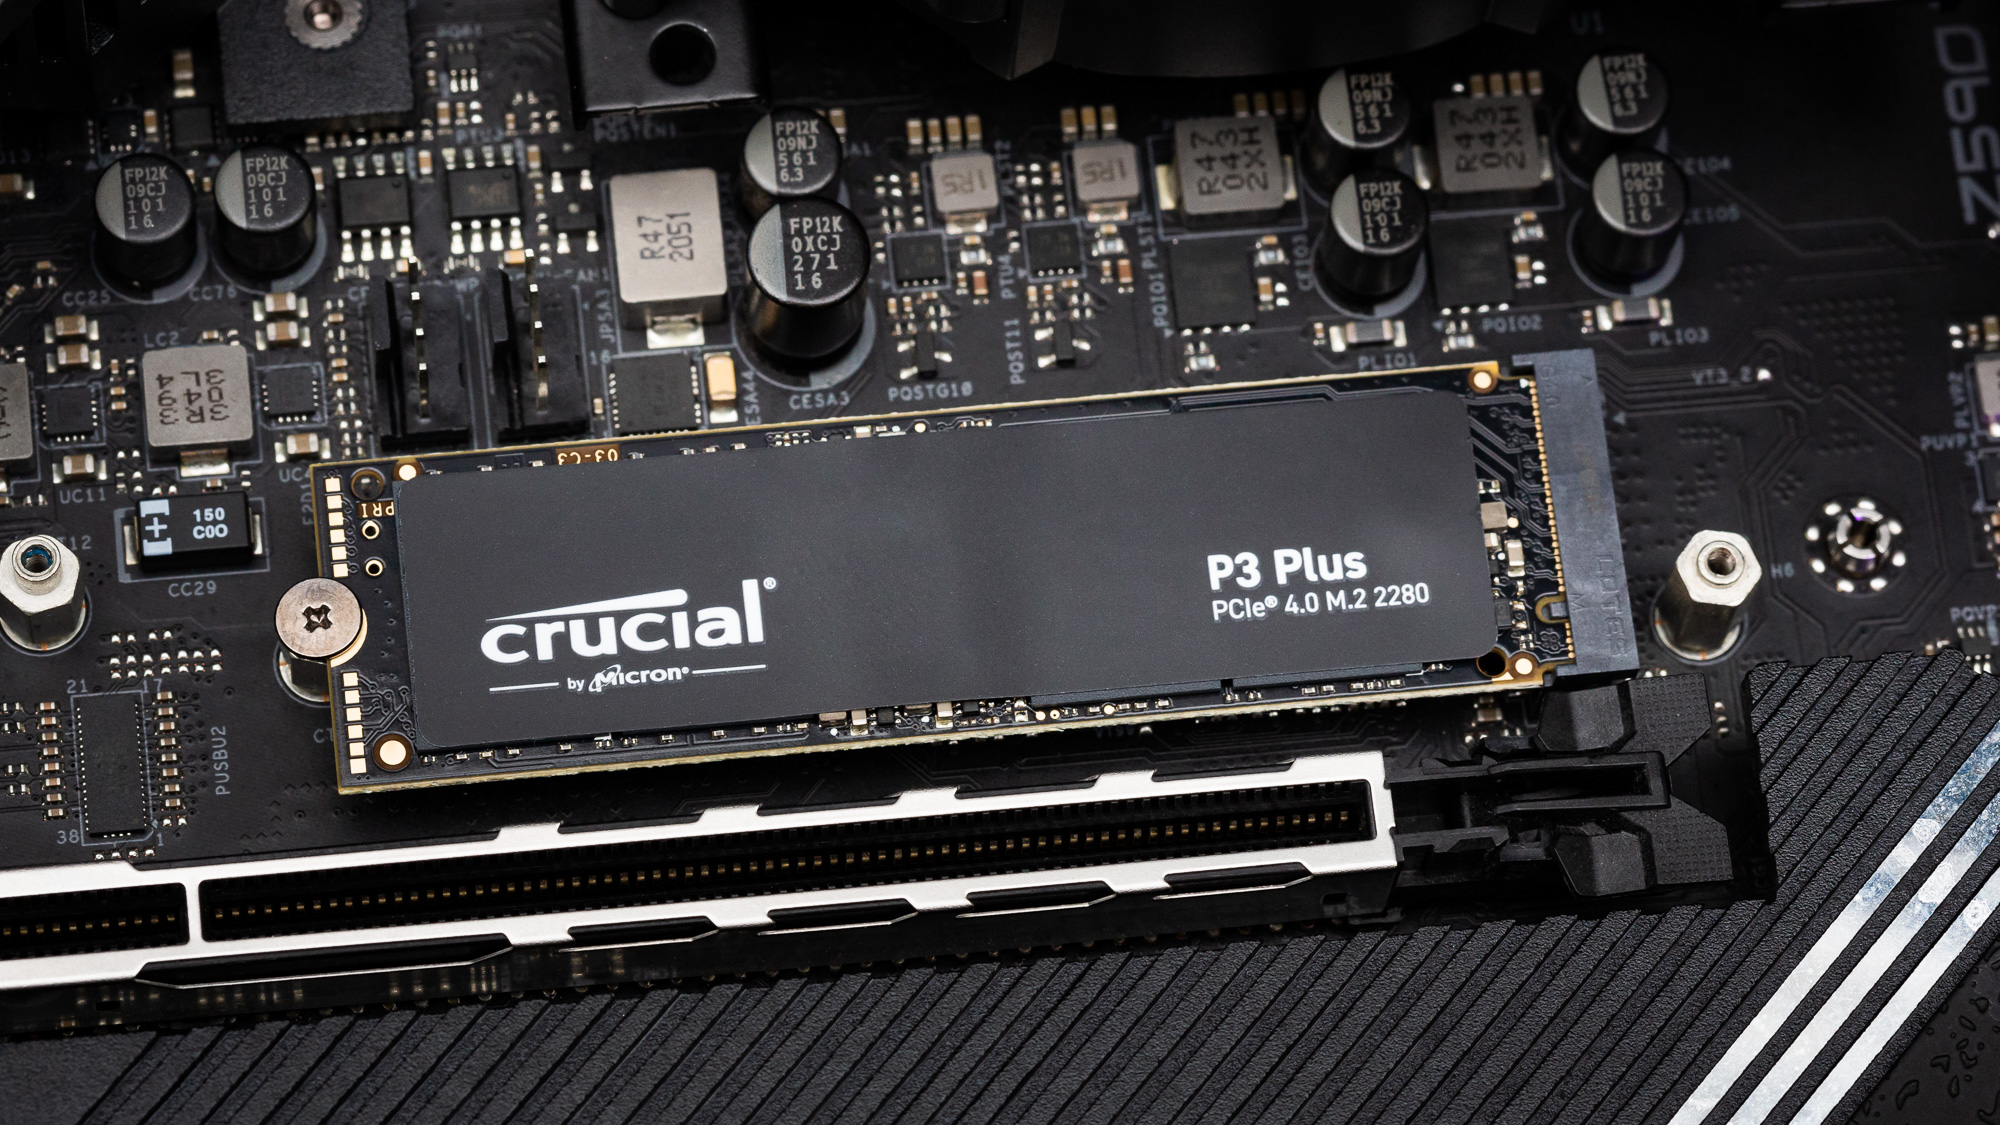 2TB Performance Results - Crucial P3 Plus SSD Review: Capacity on